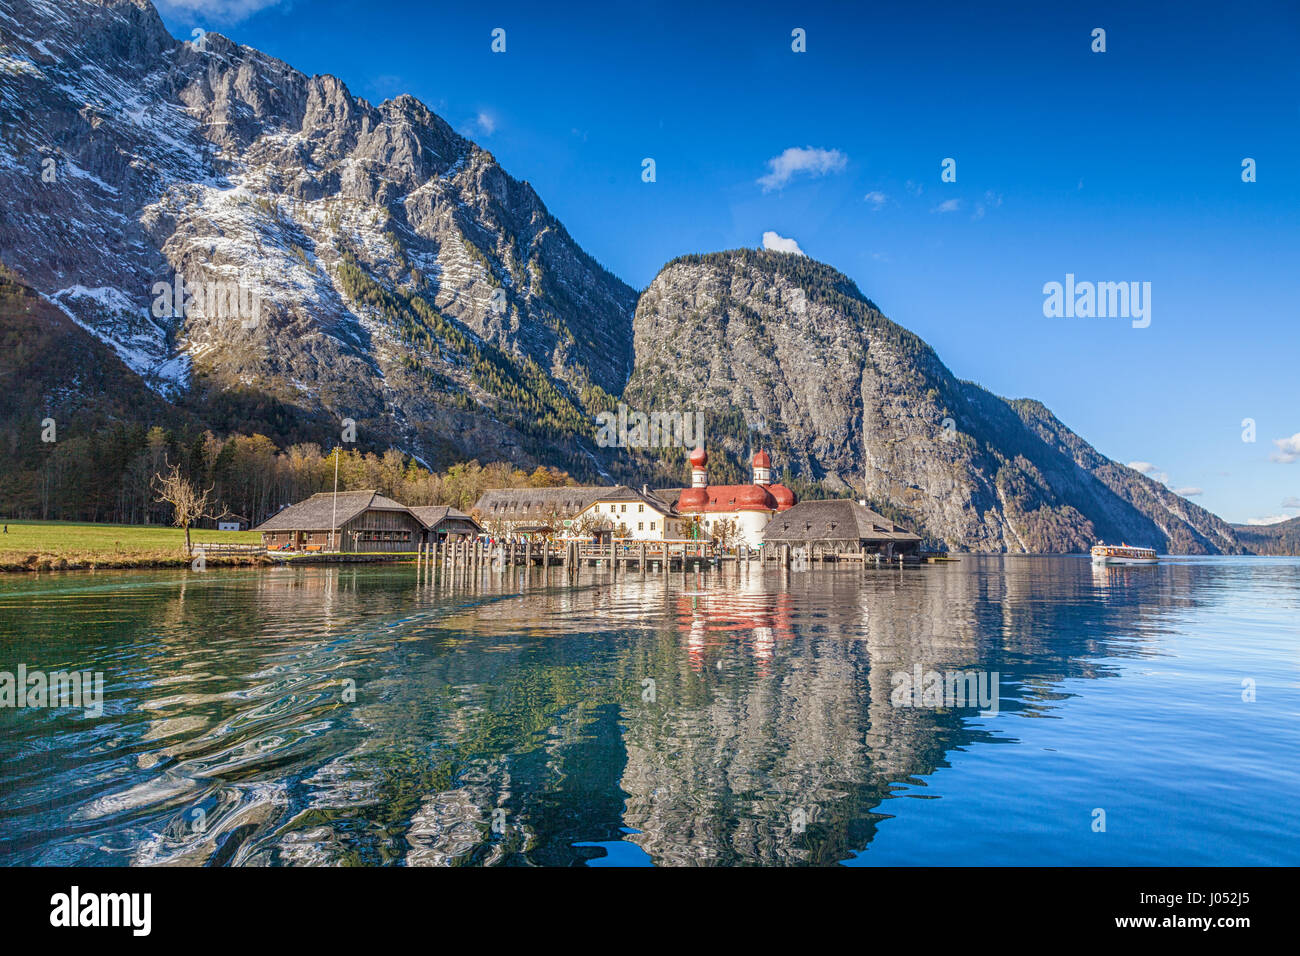 Beautiful view of scenic mountain scenery with Lake Konigssee with famous Sankt Bartholomae pilgrimage church and passenger ship, Nationalpark Berchte Stock Photo